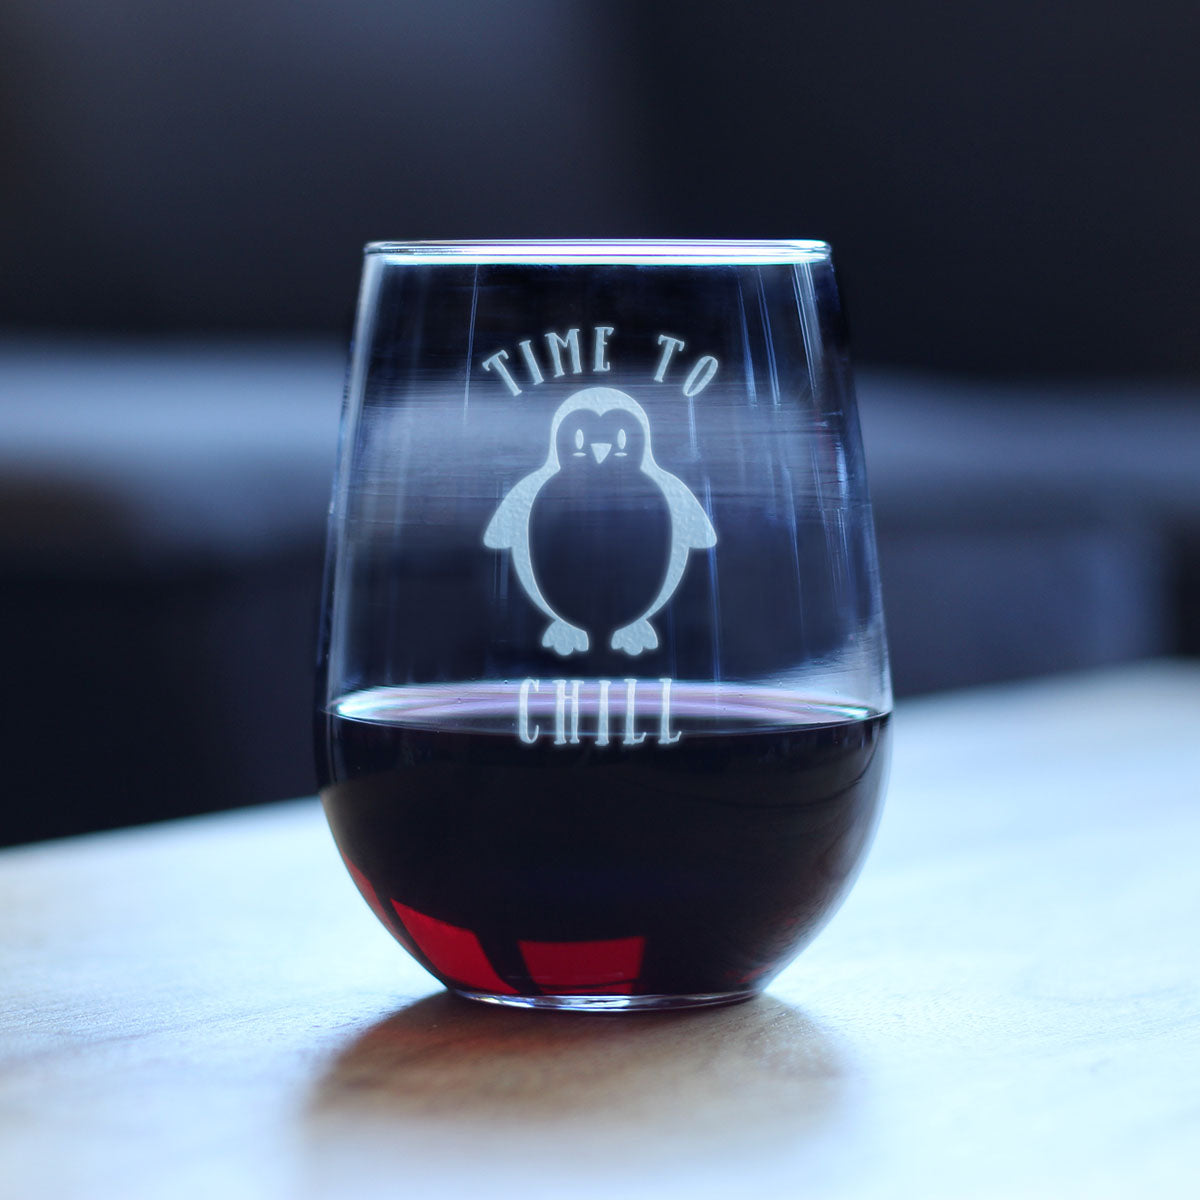 Time to Chill - Stemless Wine Glass - Funny Cute Penguin Themed Gifts and Decor - Large 17 oz